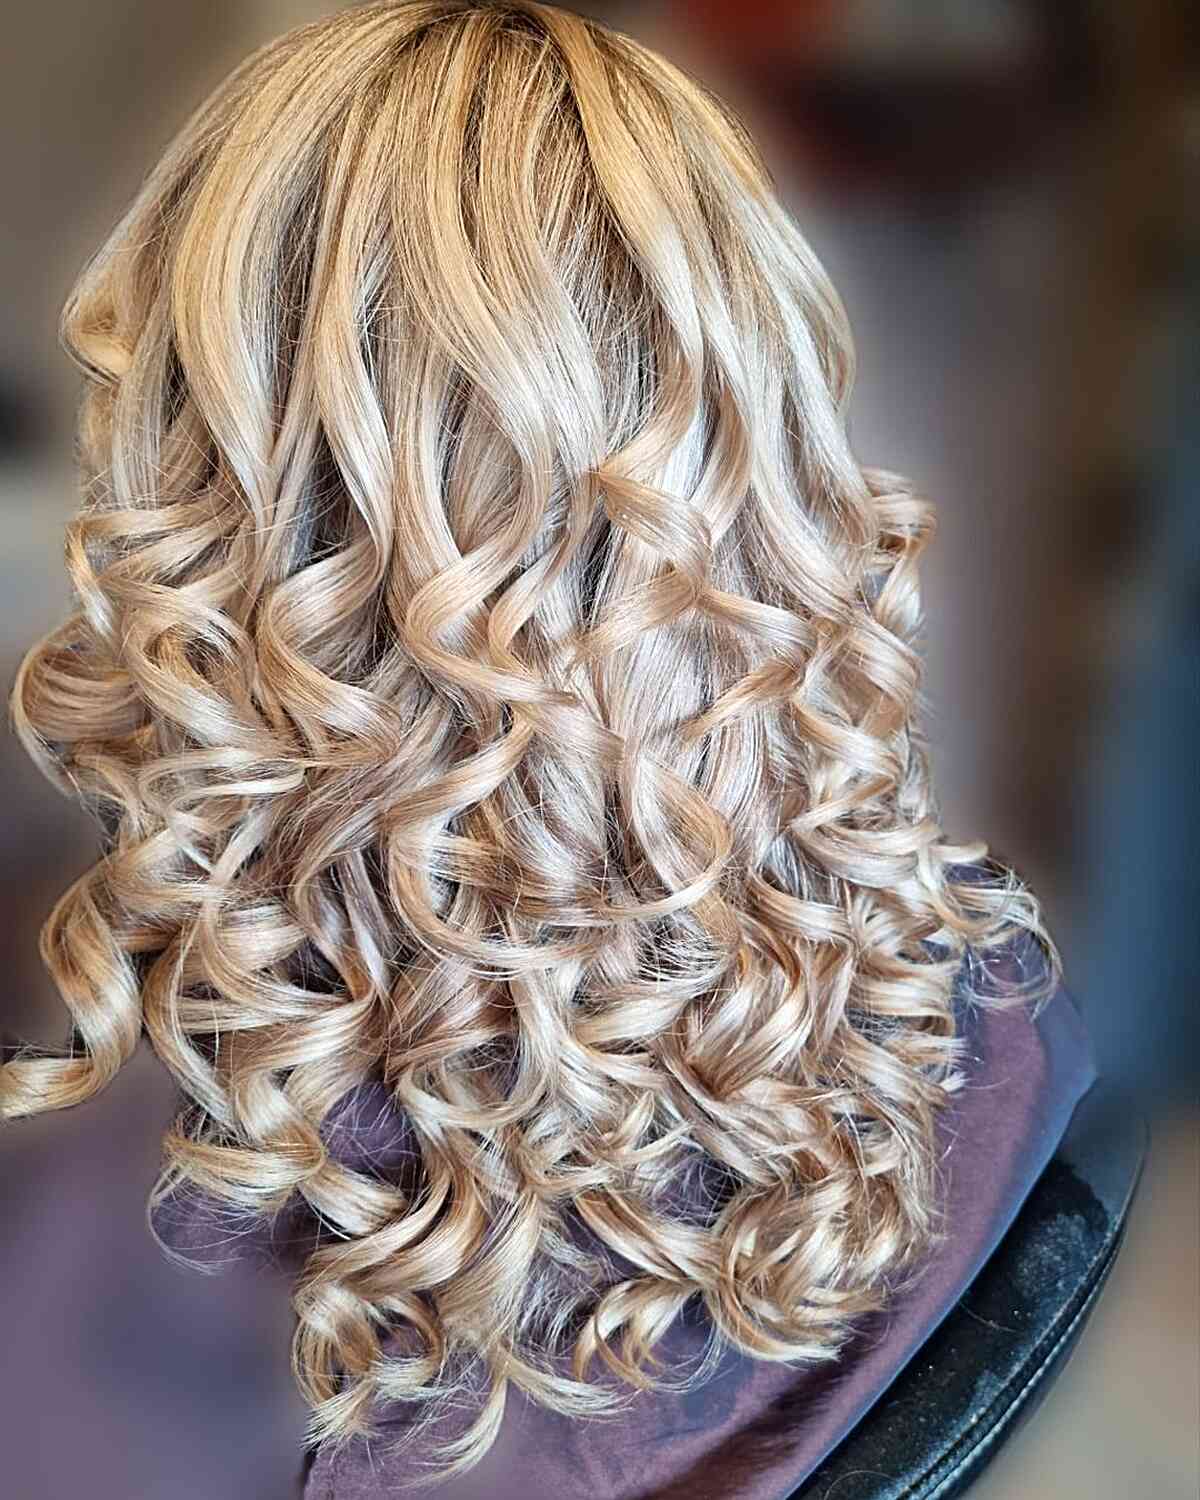 Tight Blonde Curls Party Hairstyle